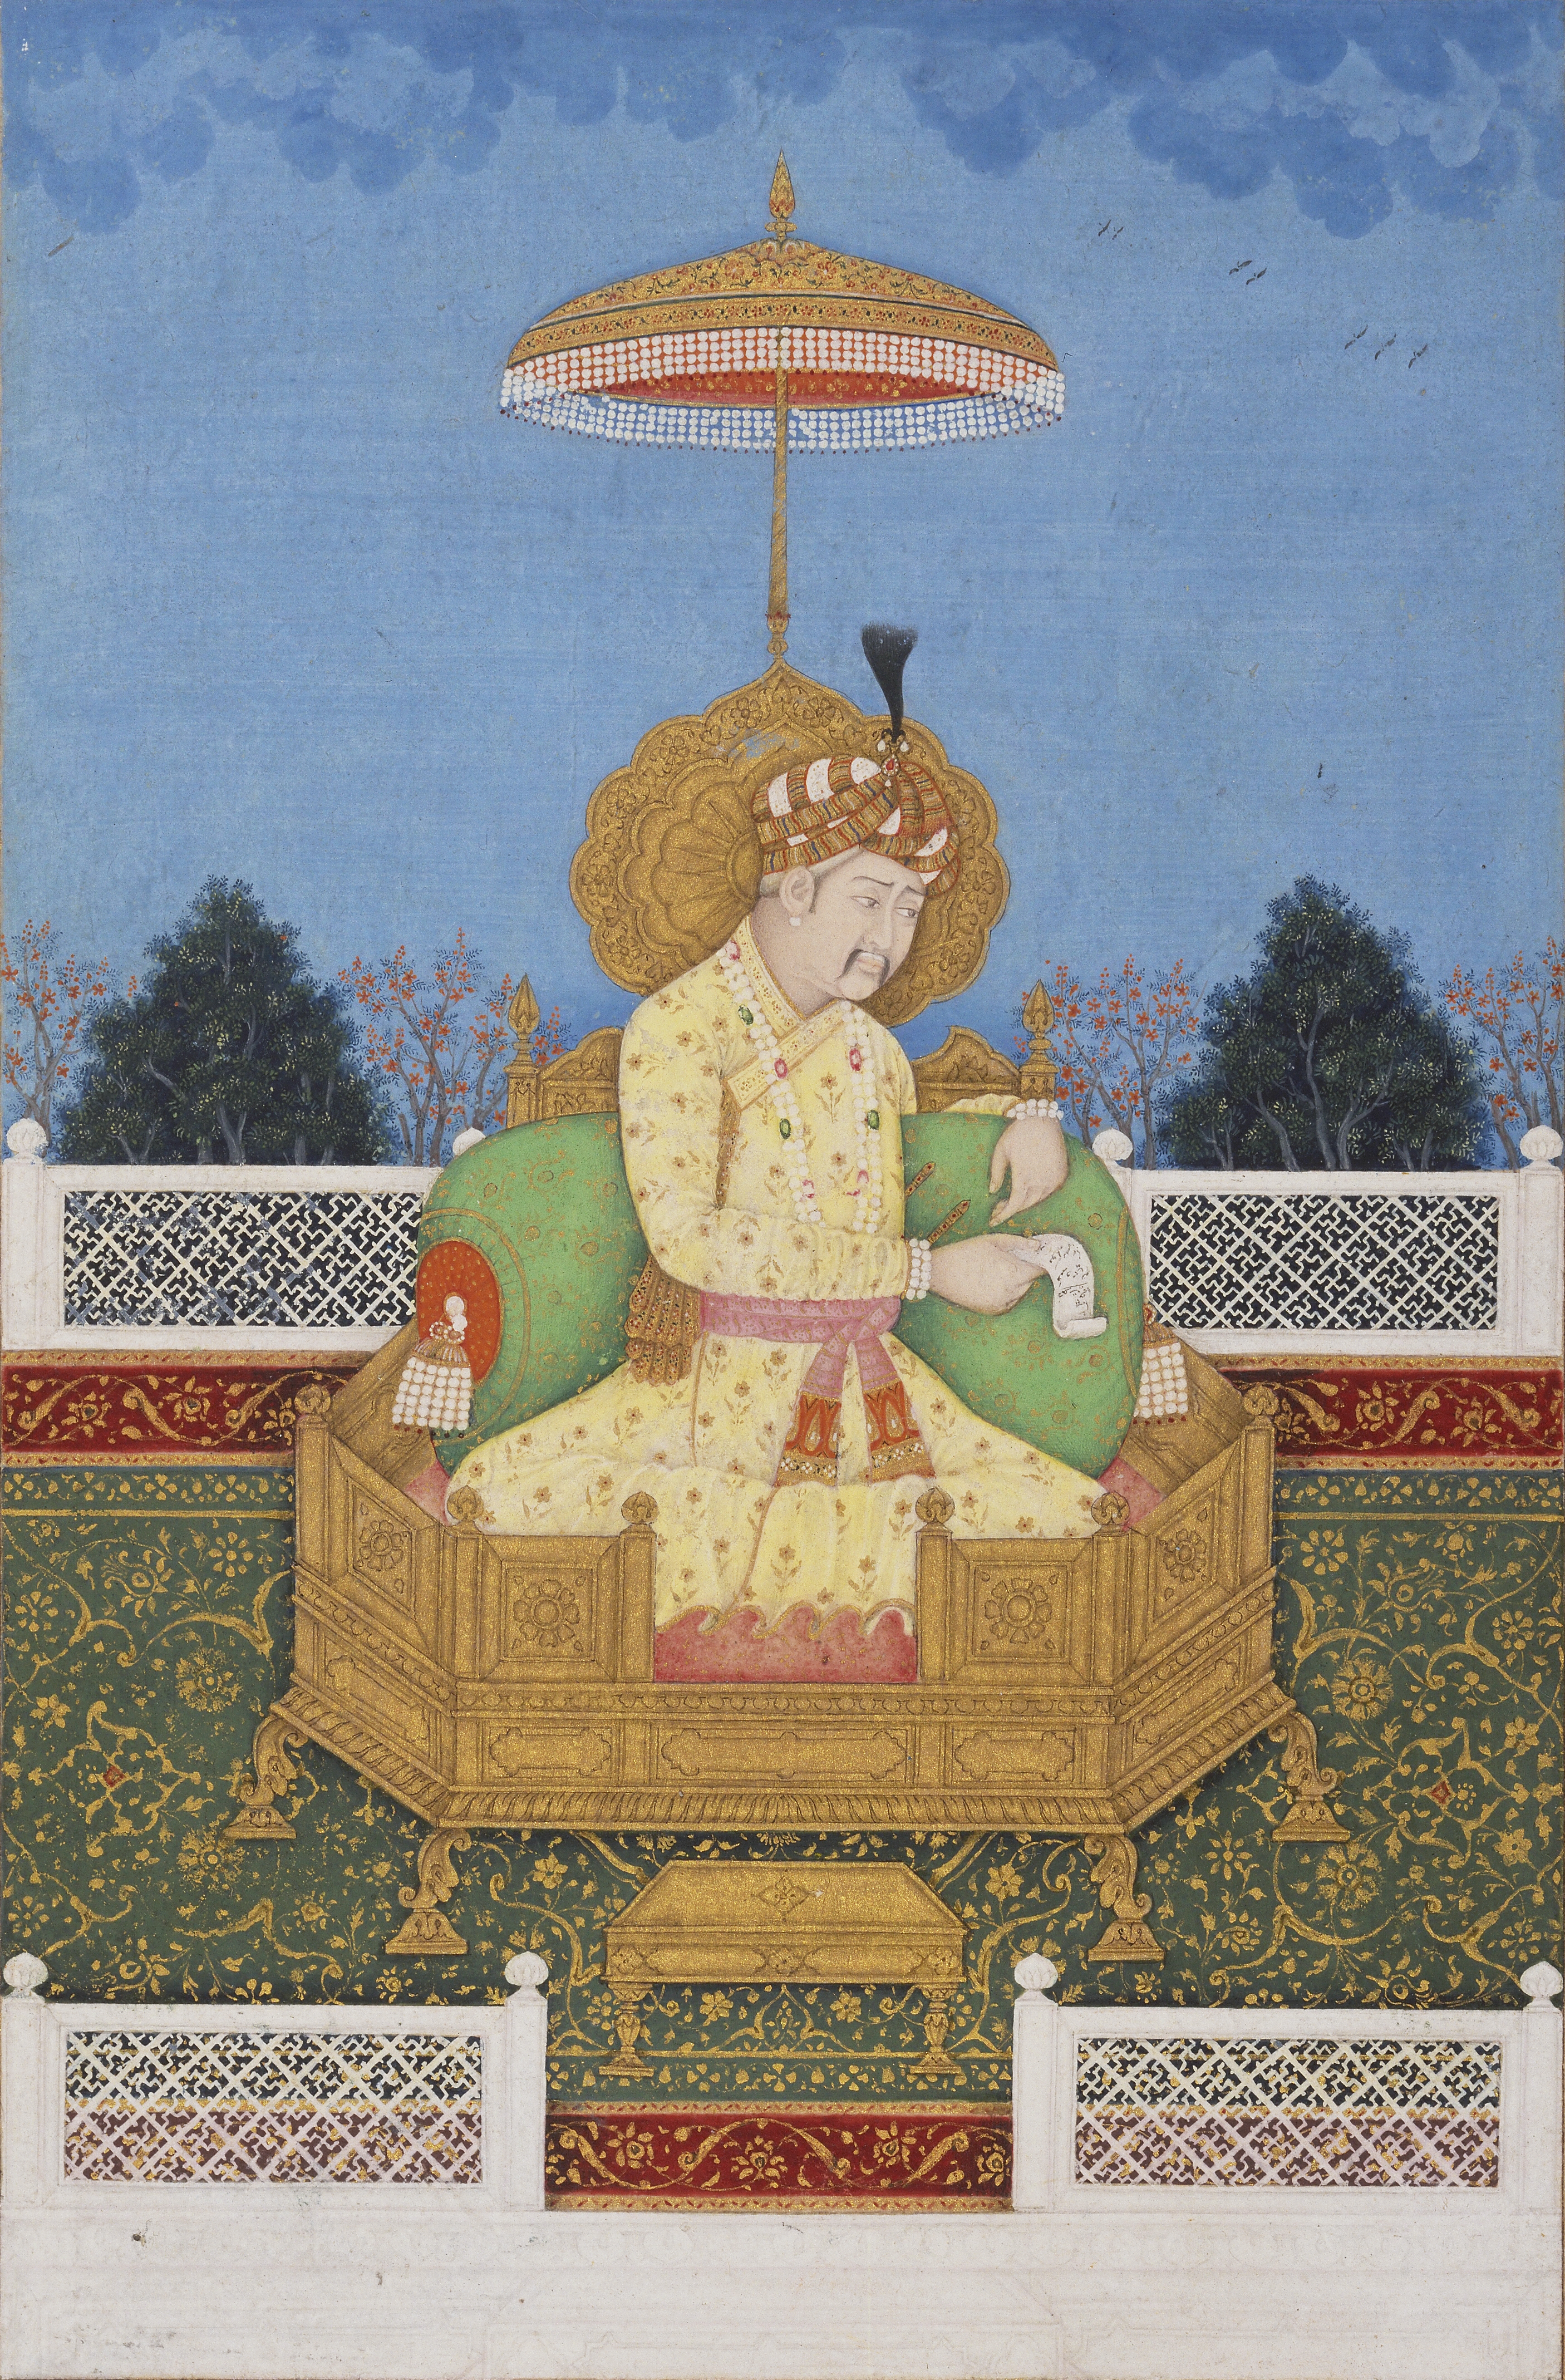 Person of royalty dressed in fancy clothes sitting on what looks like a throne with an ornate umbrella over his head. Blue sky in background. very detailed.